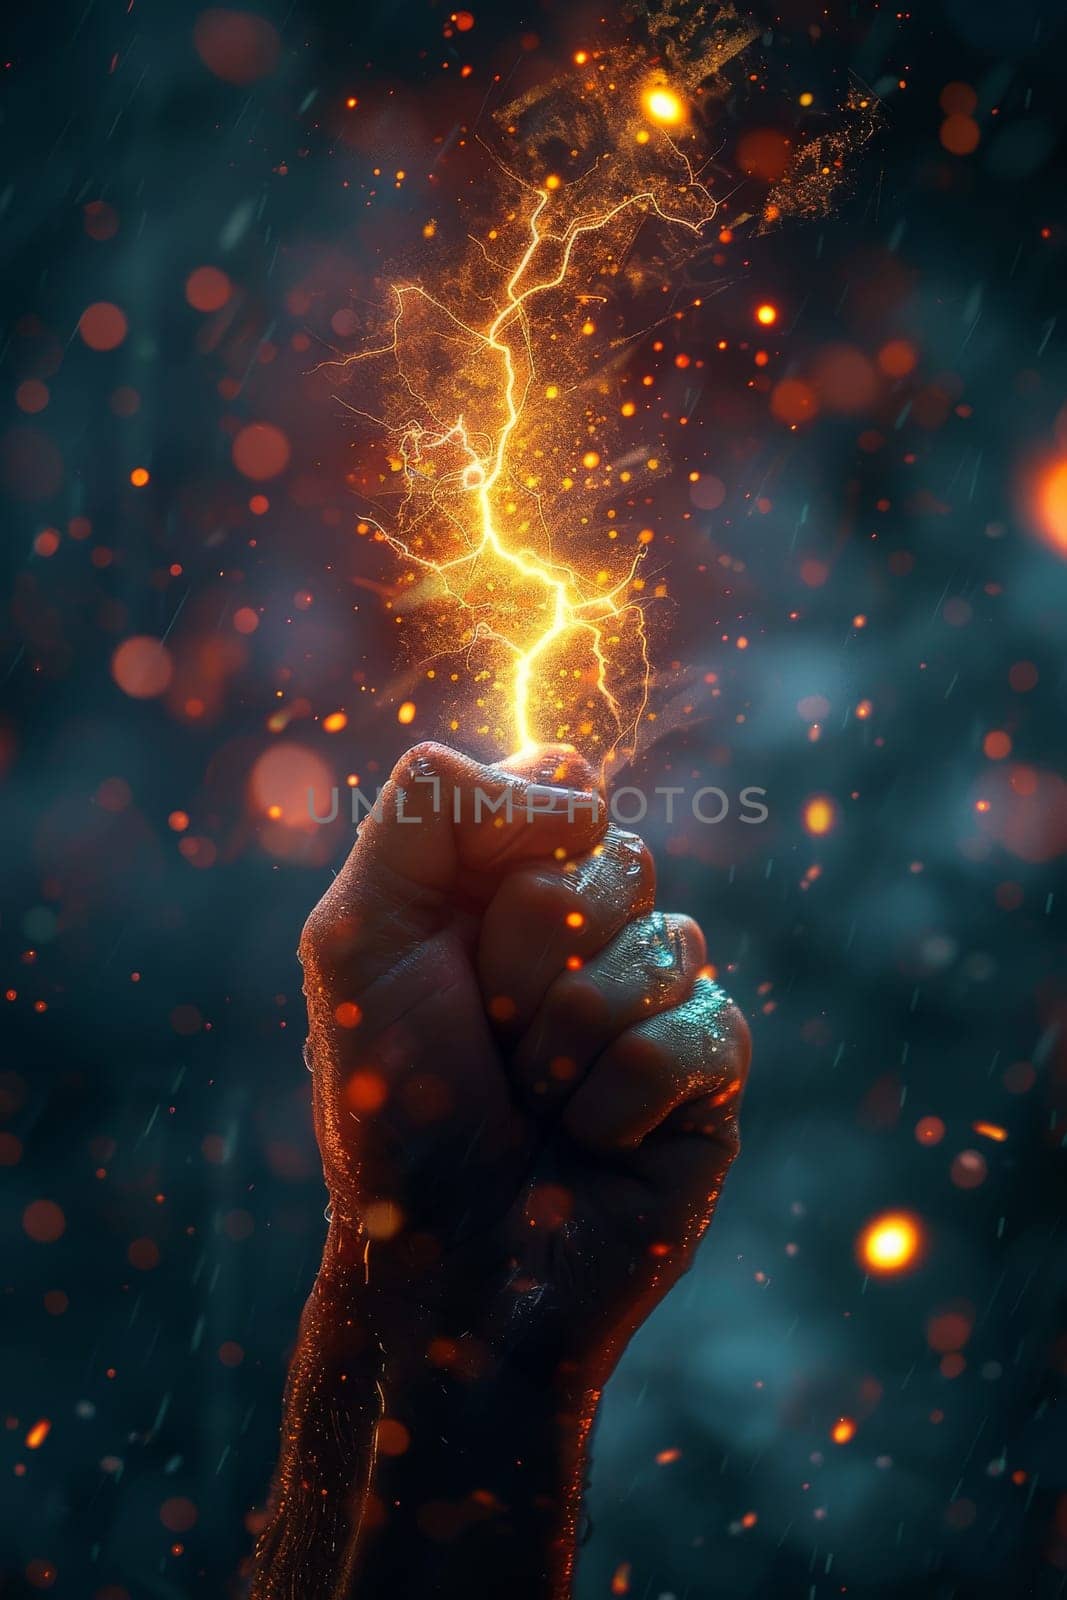 A hand is holding a glowing object that looks like a lightning bolt. The image has a dark and mysterious mood, with the glowing object creating a sense of awe and wonder